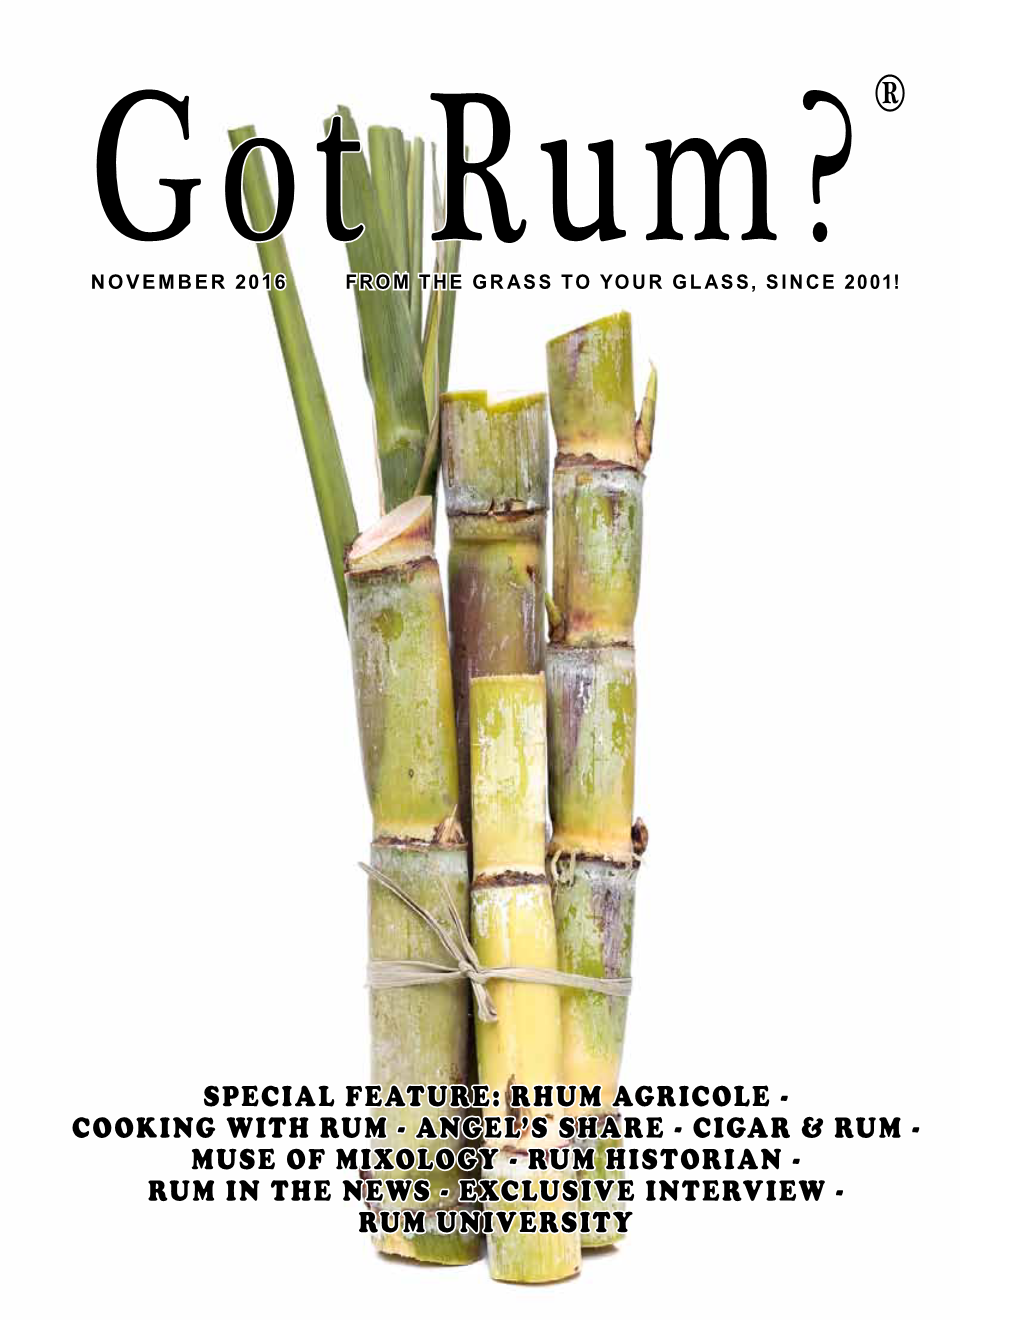 Rhum Agricole - COOKING with RUM - Angel’S Share - CIGAR & Rum - MUSE of MIXOLOGY - RUM HISTORIAN - RUM in the NEWS - EXCLUSIVE INTERVIEW - RUM UNIVERSITY 6